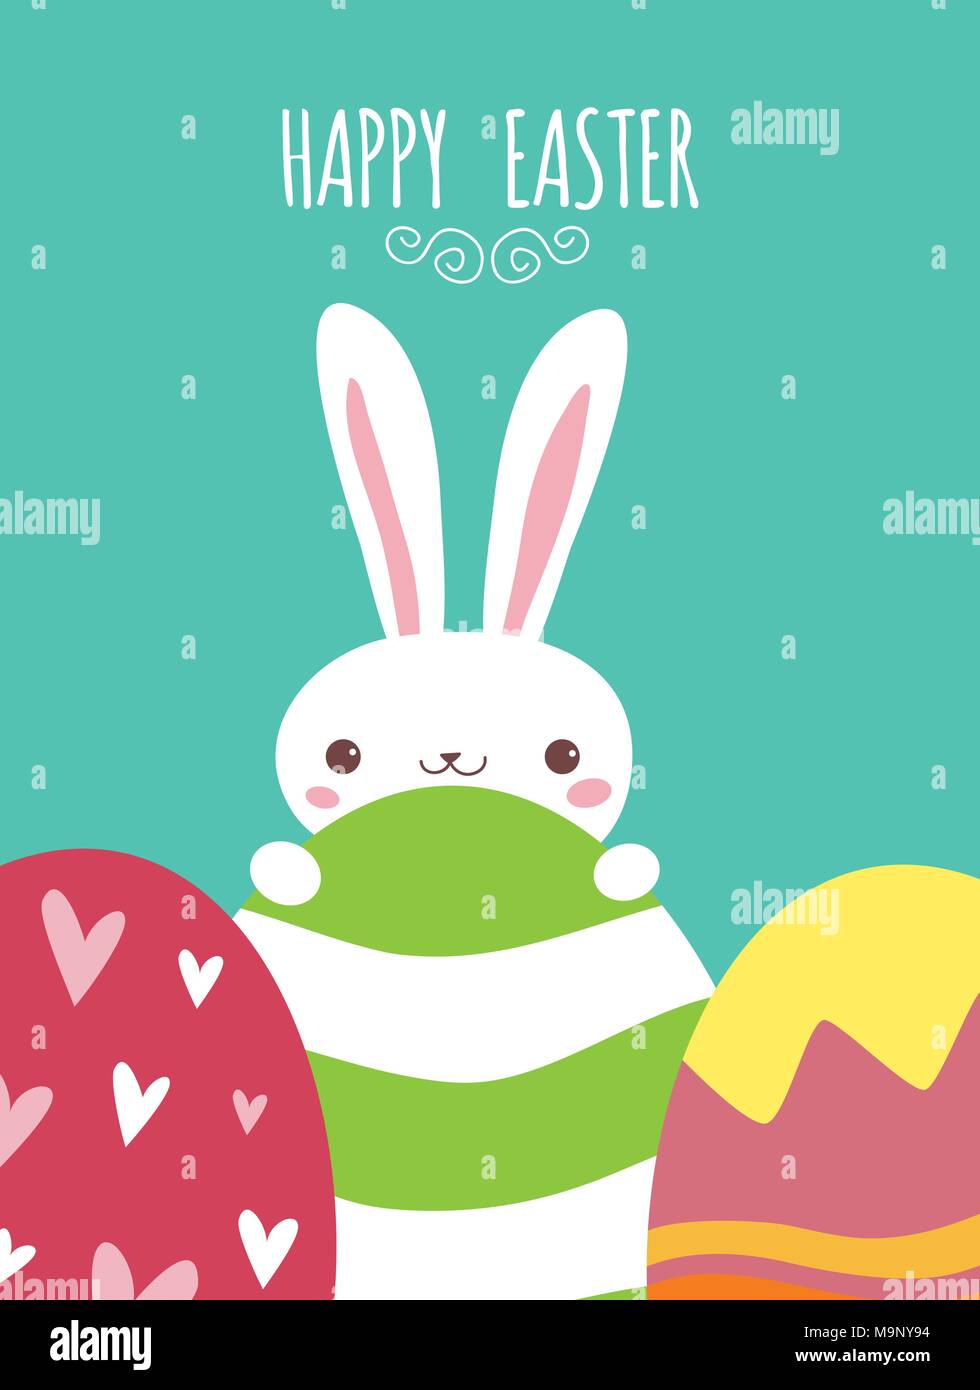 Happy Easter vector card template with a bunny character Stock Vector ...